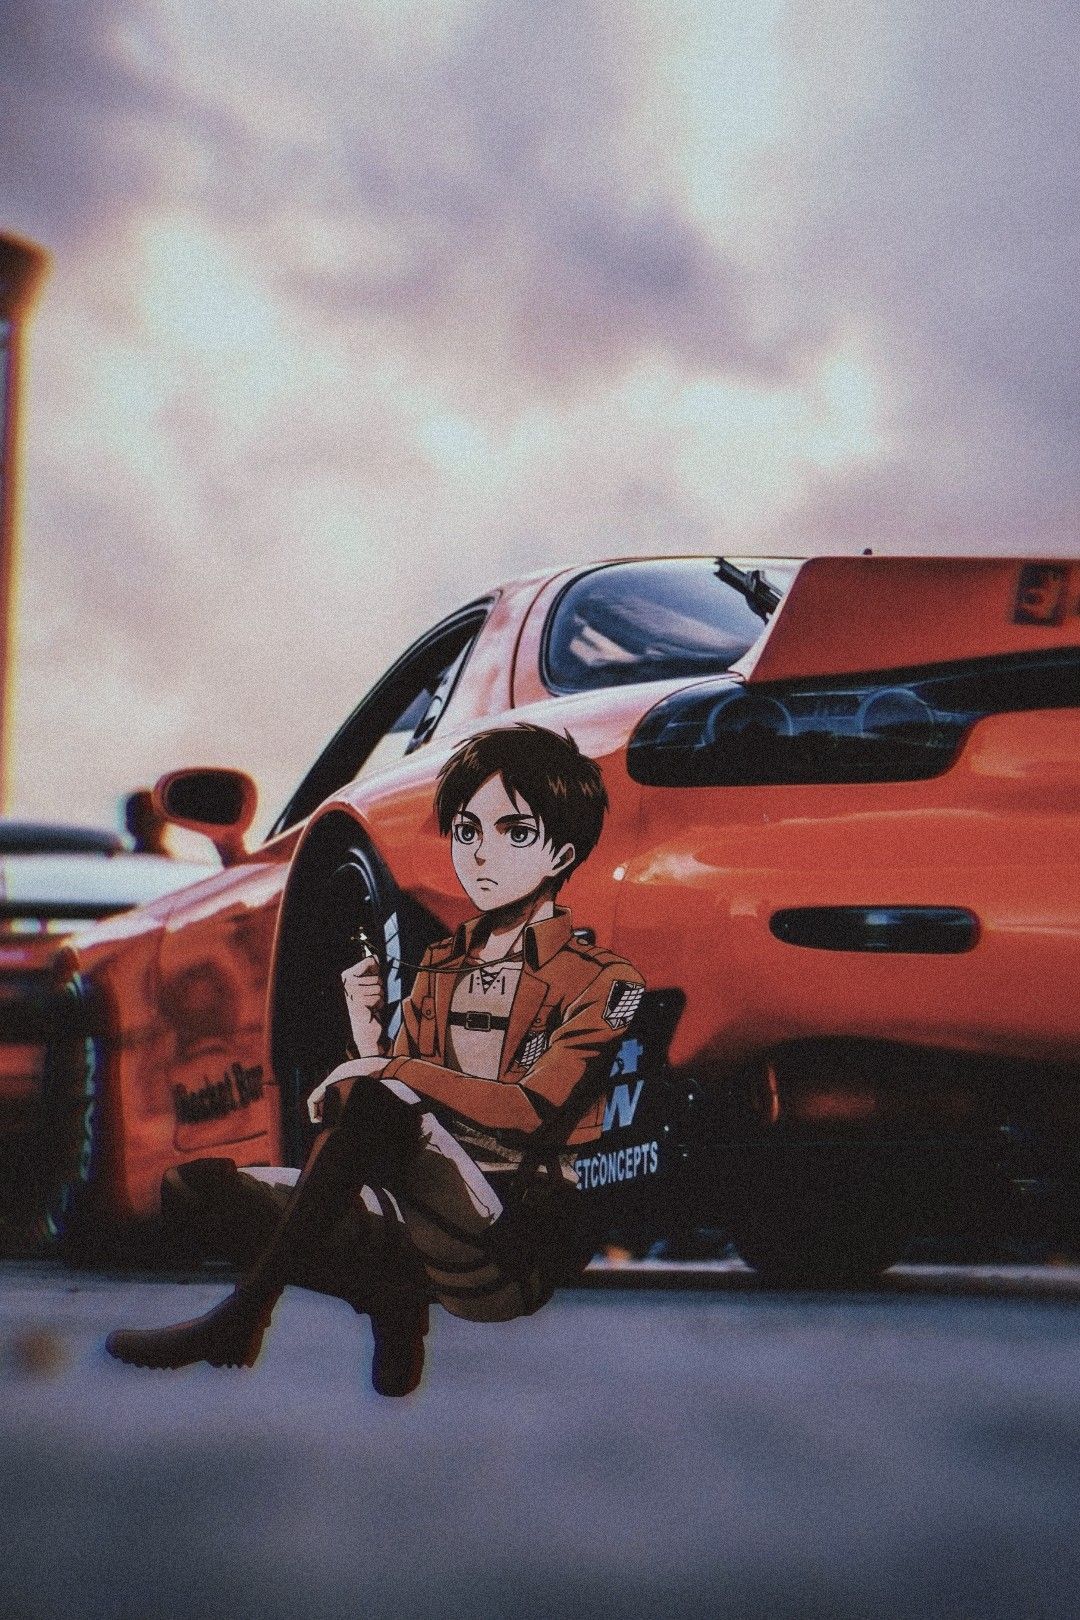 A Collection of JDM X ANIME WALLPAPER MADE BY ME. Car wallpaper, Jdm wallpaper, New car wallpaper